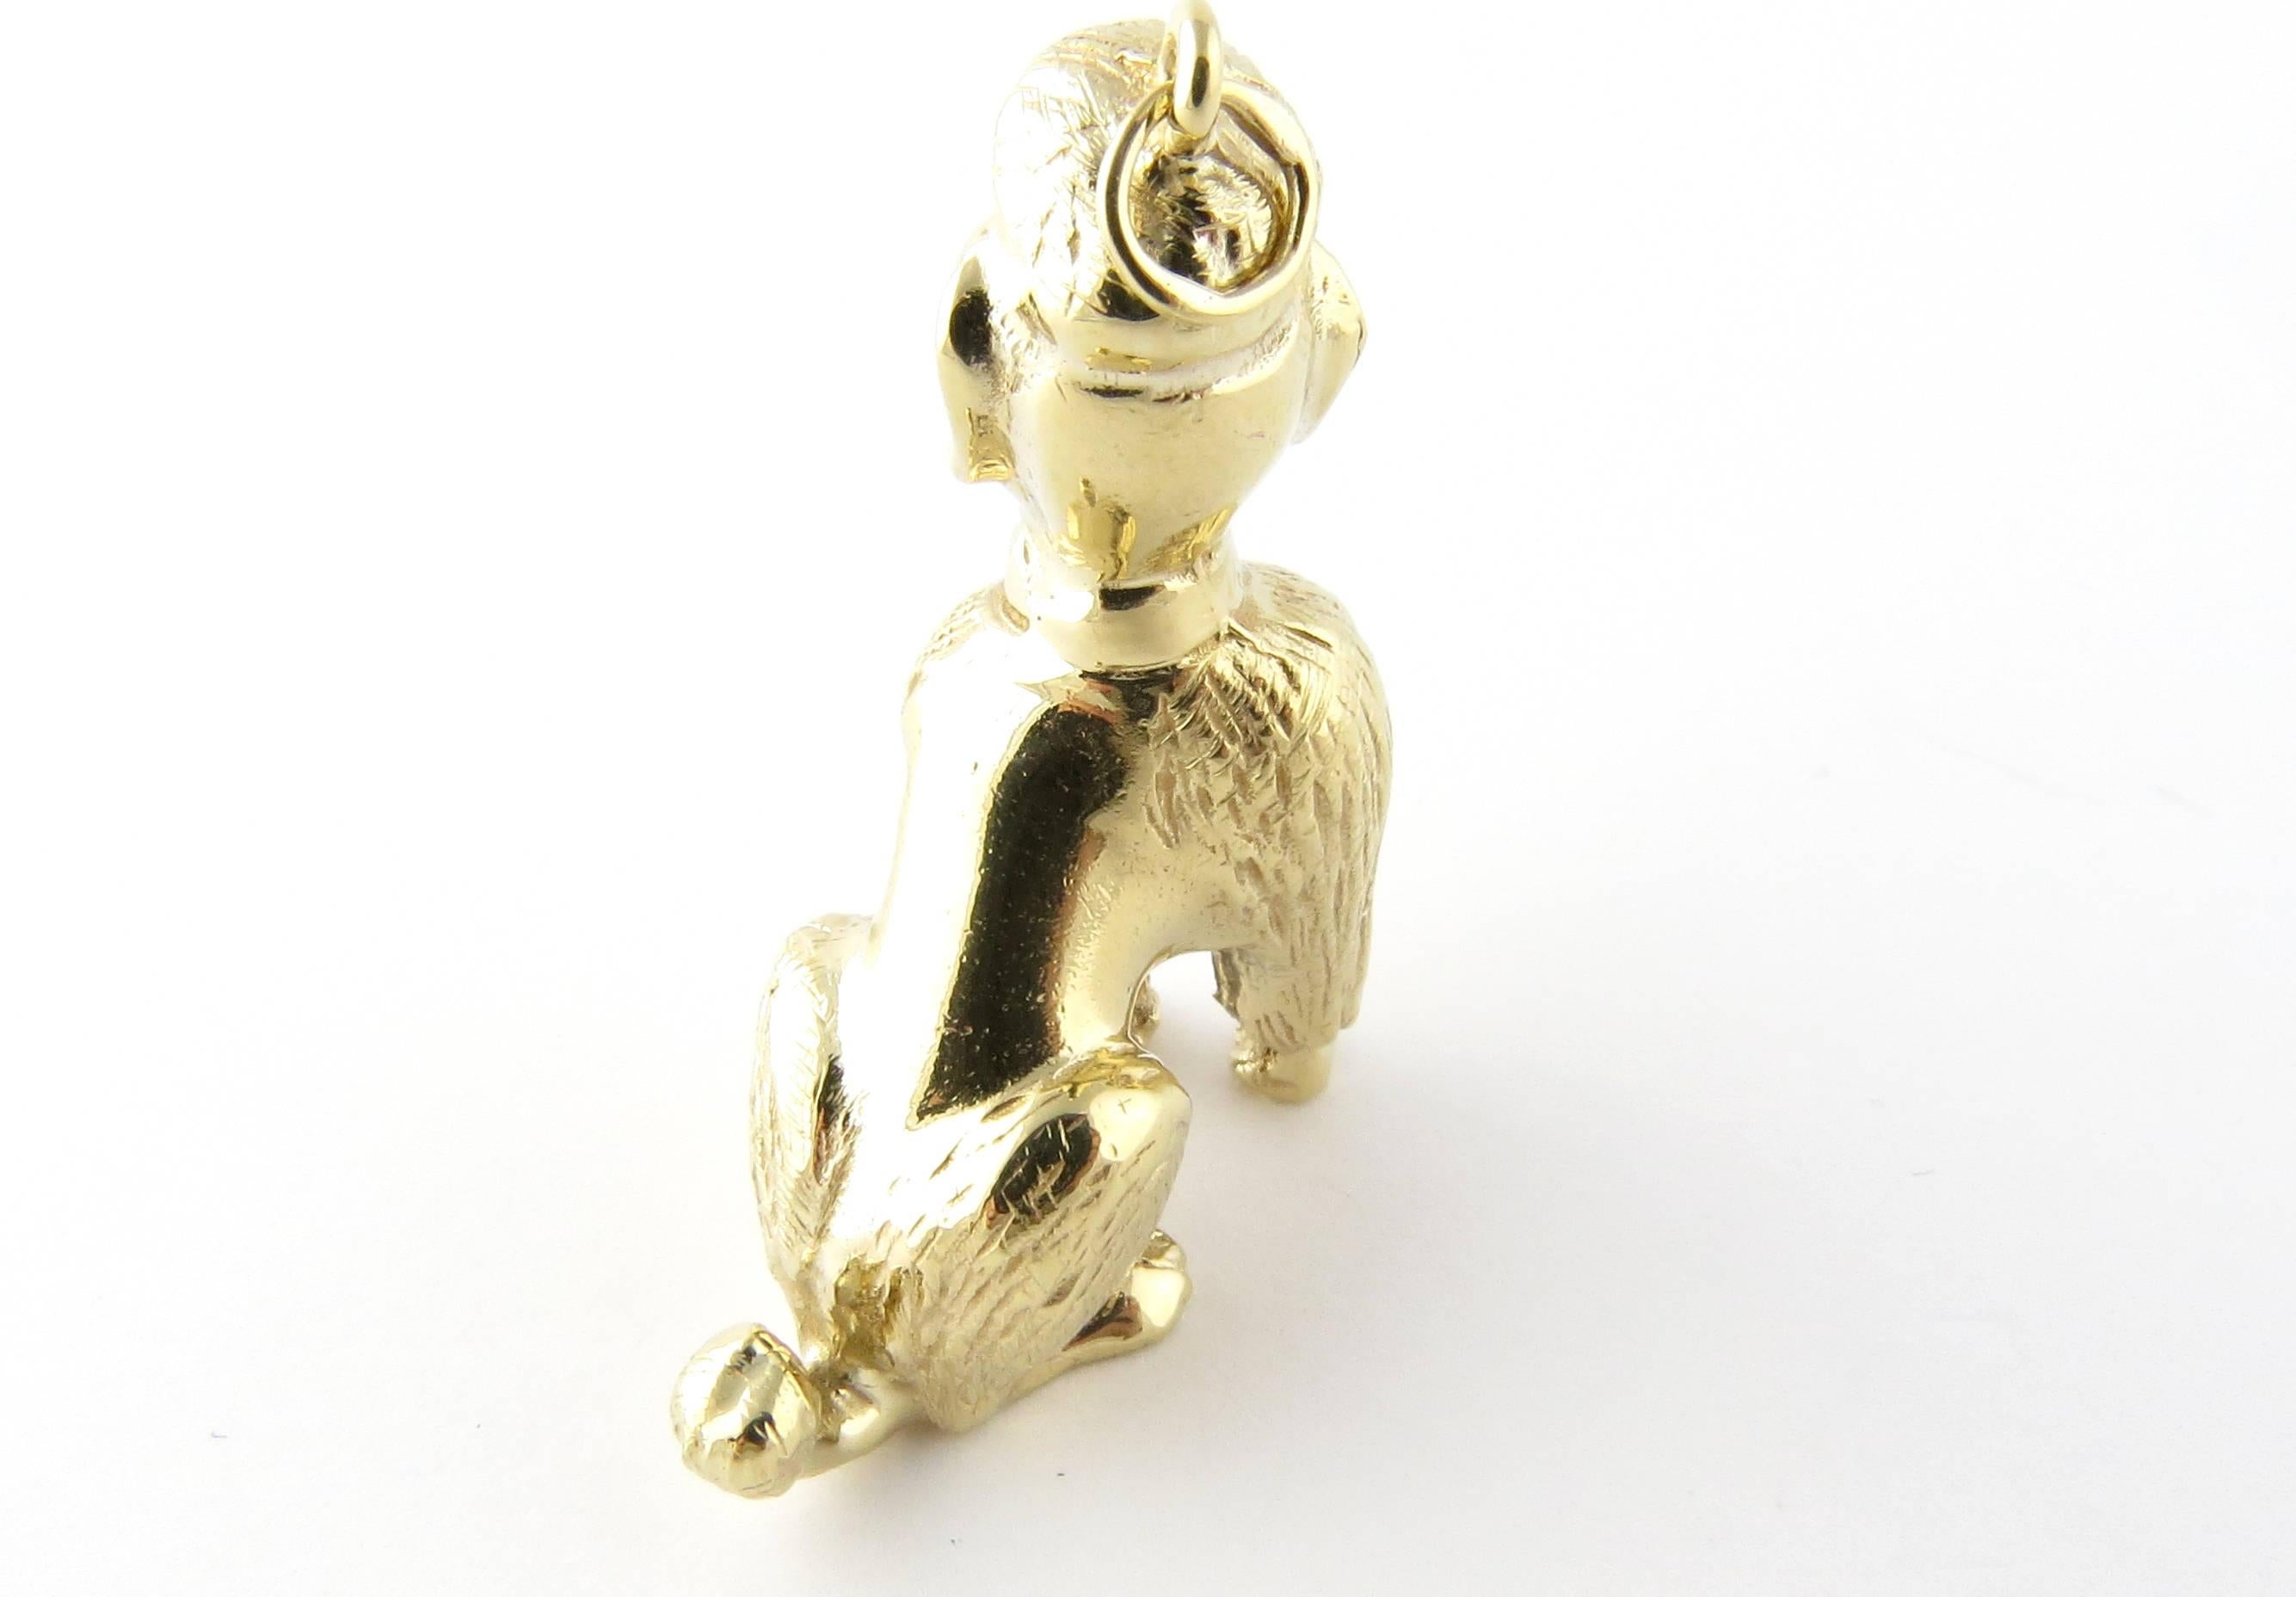 Vintage 14 Karat Yellow Gold, Ruby and sapphire Poodle Charm

Best in Show!

This exquisite 3D charm features a proud poodle accented with two genuine sapphires and a ruby. Meticulously detailed in 14K yellow gold.

Size: 37 mm x 23 mm (actual